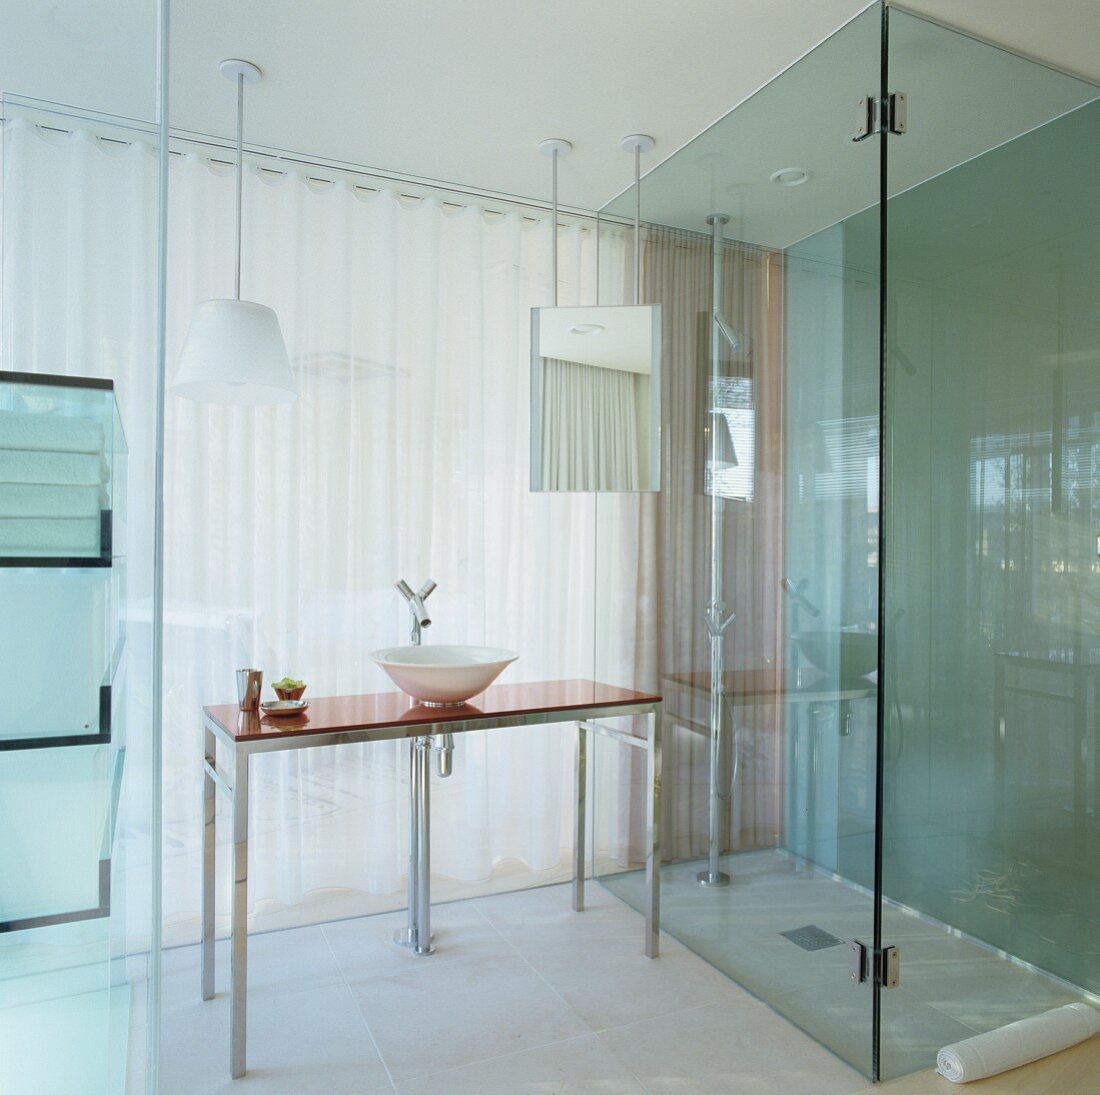 Glass ensuite hotel bathroom with floor-level shower and modern washstand with Philippe Starck tap fittings in front of translucent curtain leading to bedroom